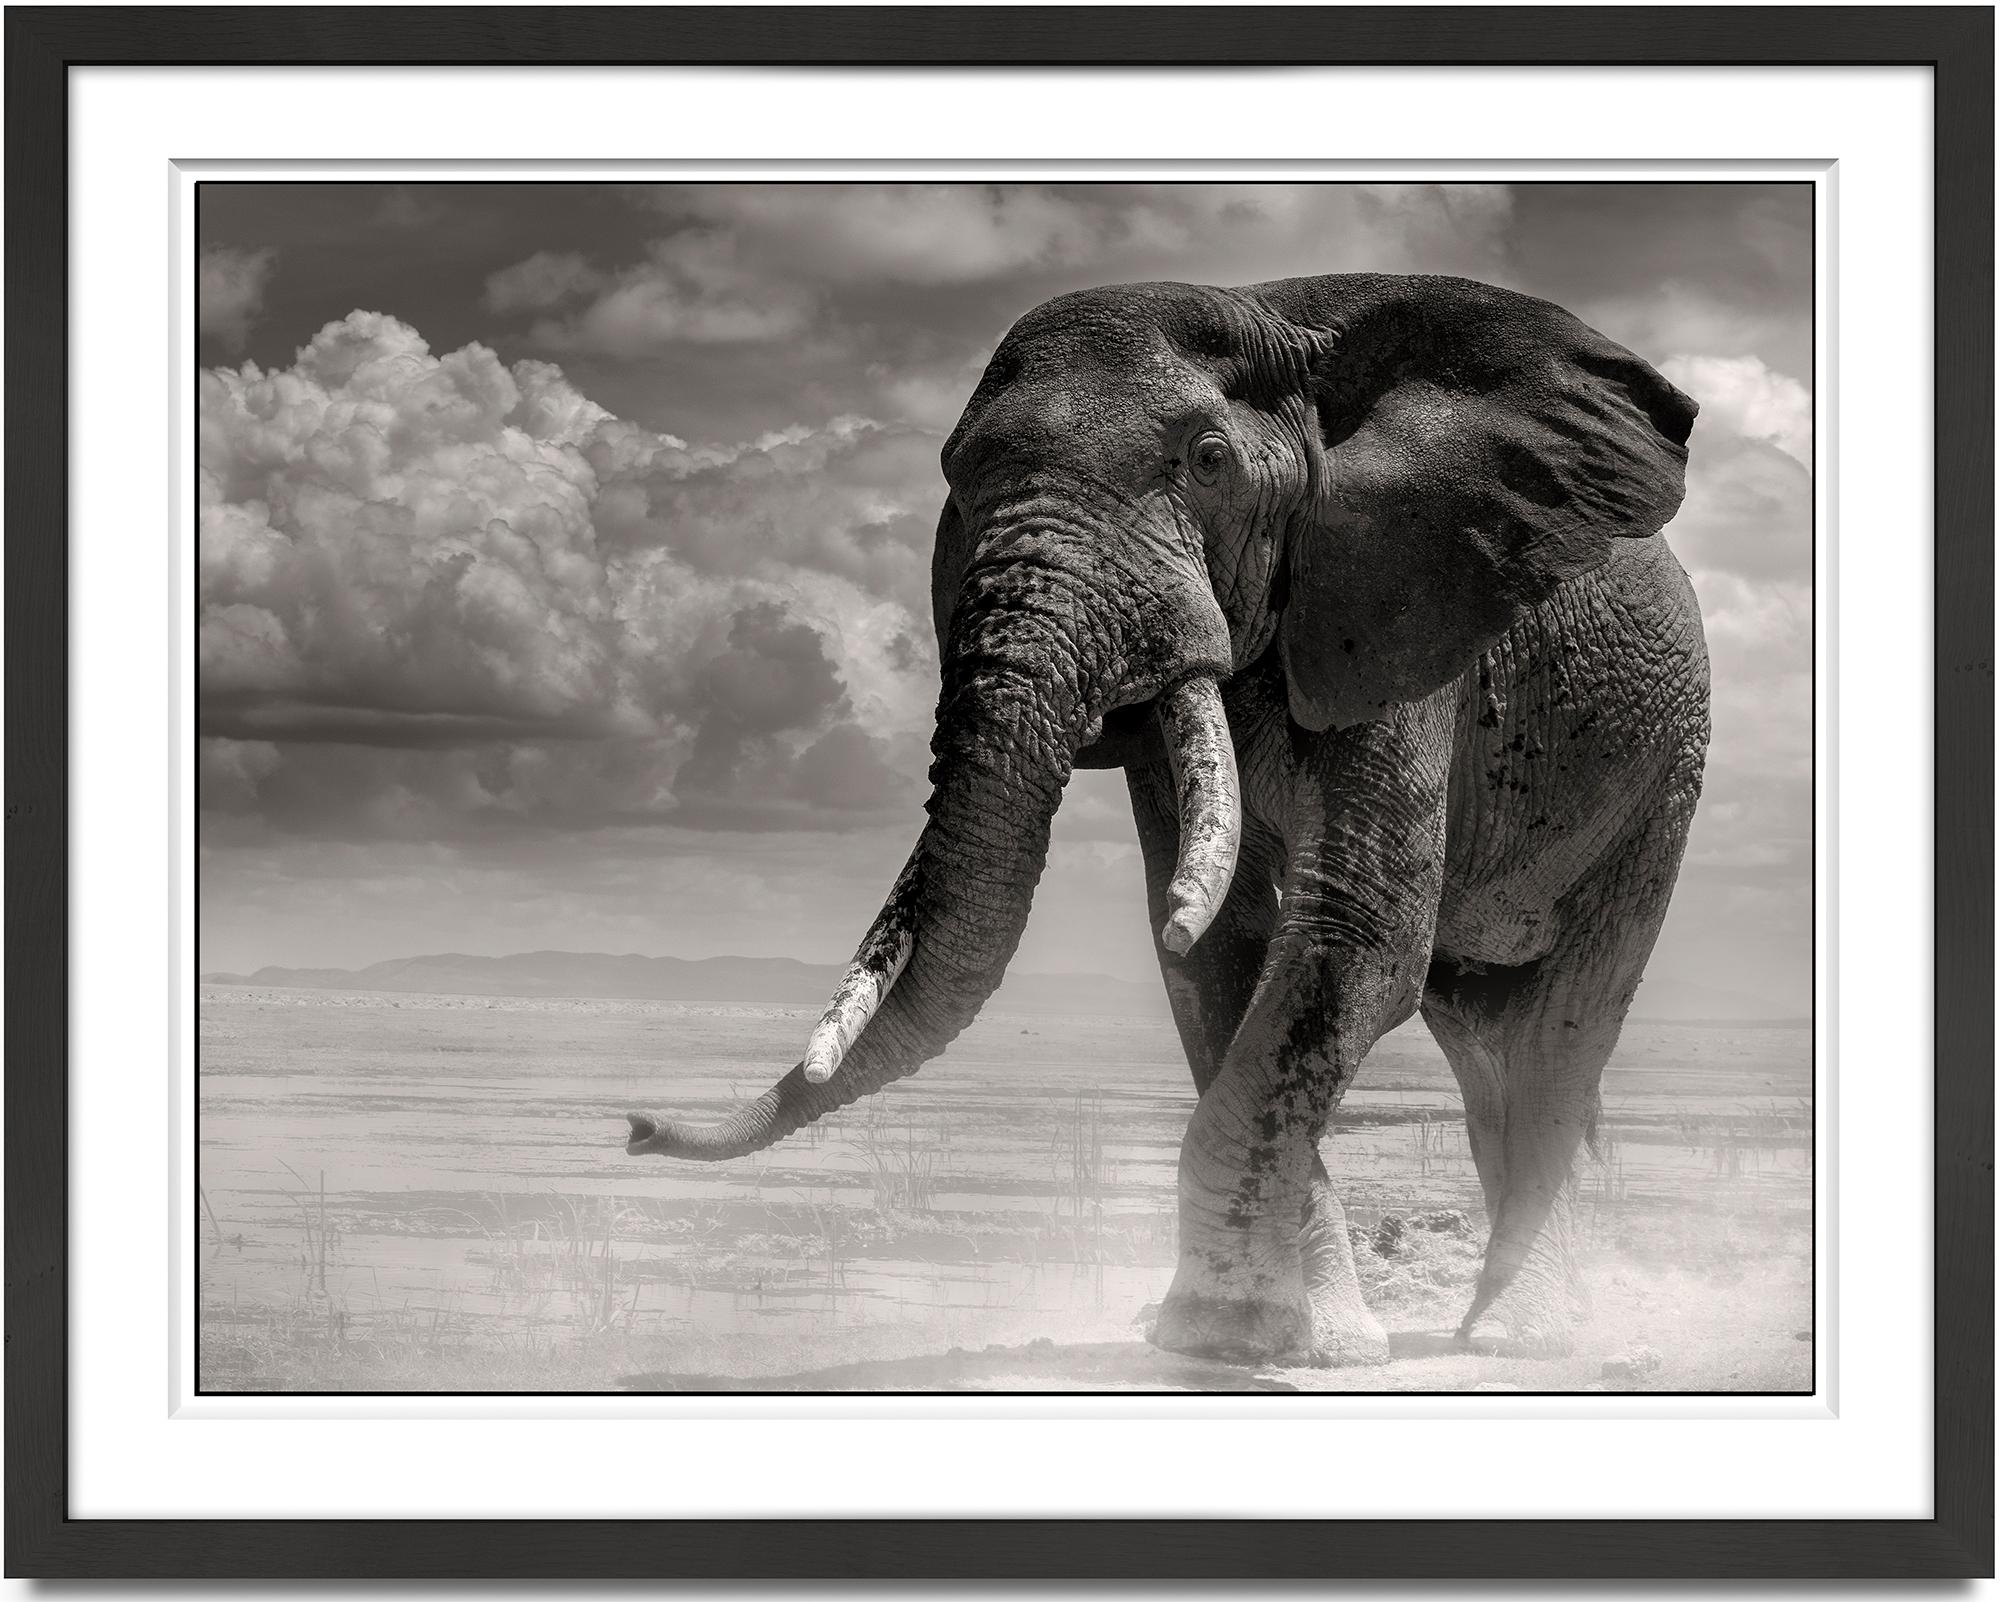 Elephant bull coming out of the marsh, animal, black and white photography - Photograph by Joachim Schmeisser